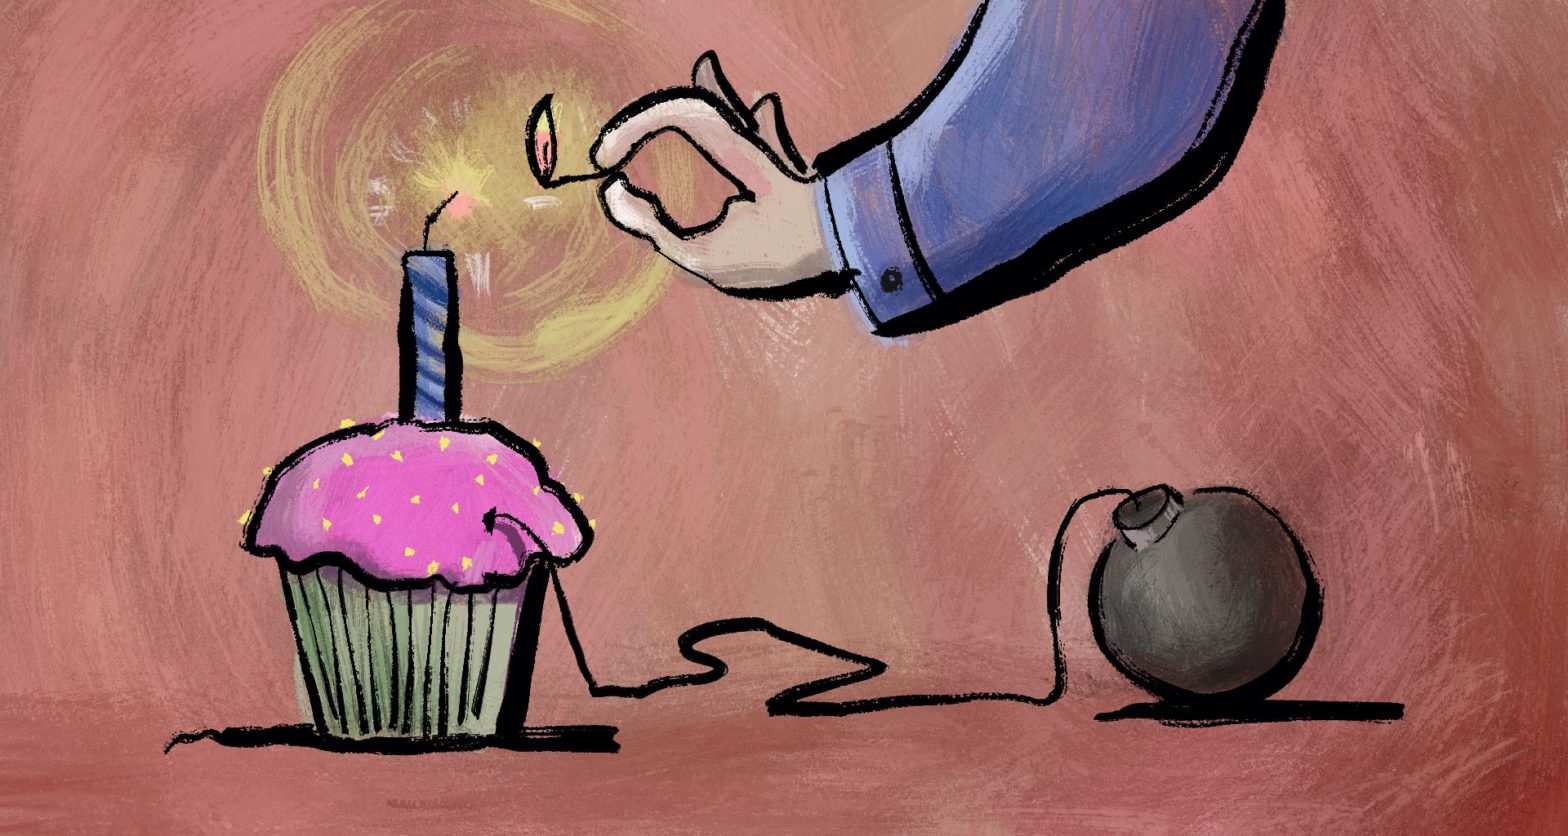 someone lighting a candle in a cup cake but the candle is unknowingly a fuse for a bomb in the background